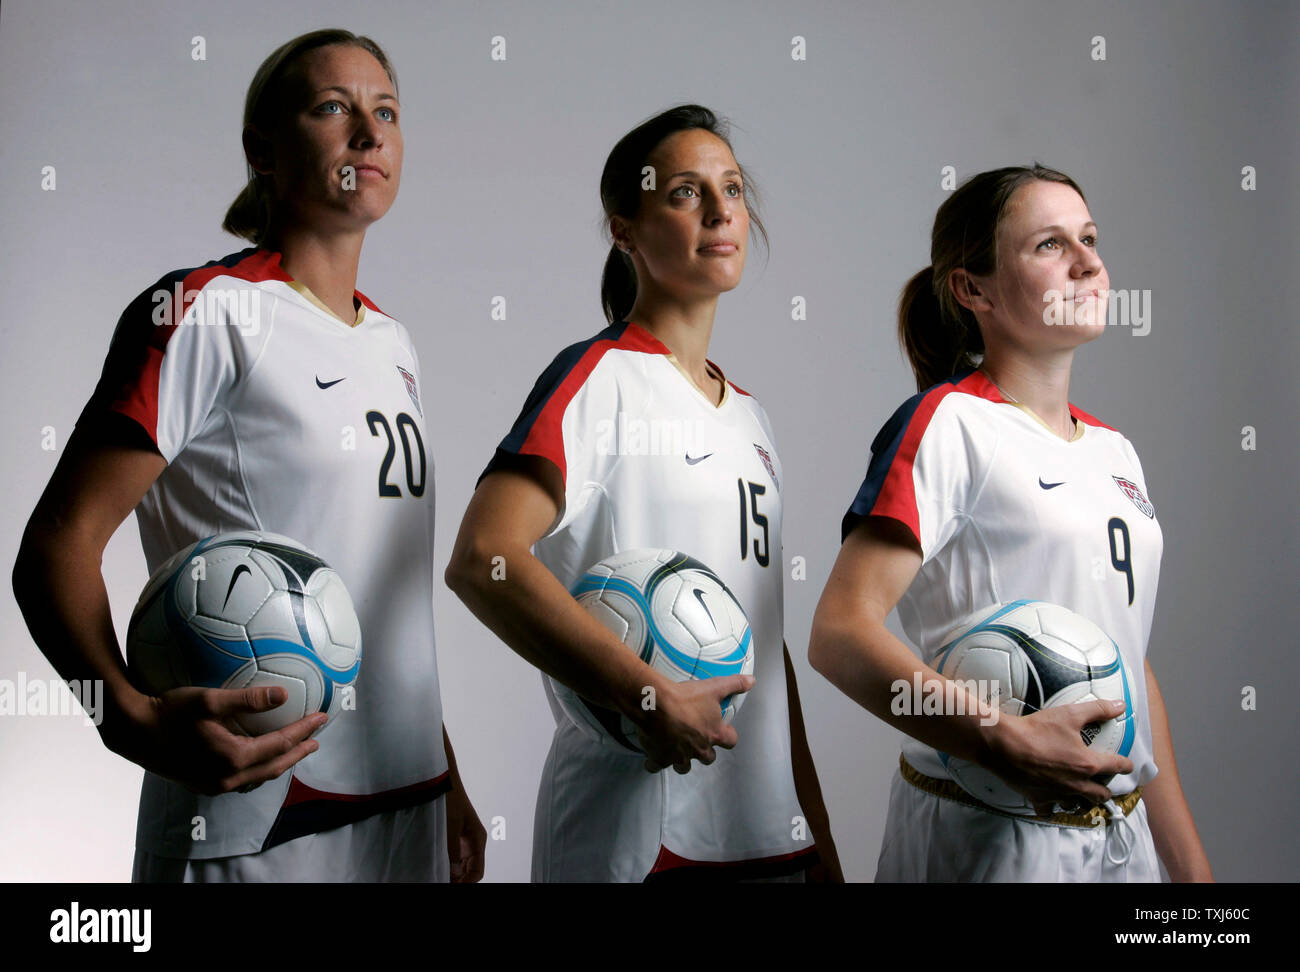 Us Womens Soccer Team Members Abby Wambach 20 Kate Markgraf 15 And Heather Oreilly 9 